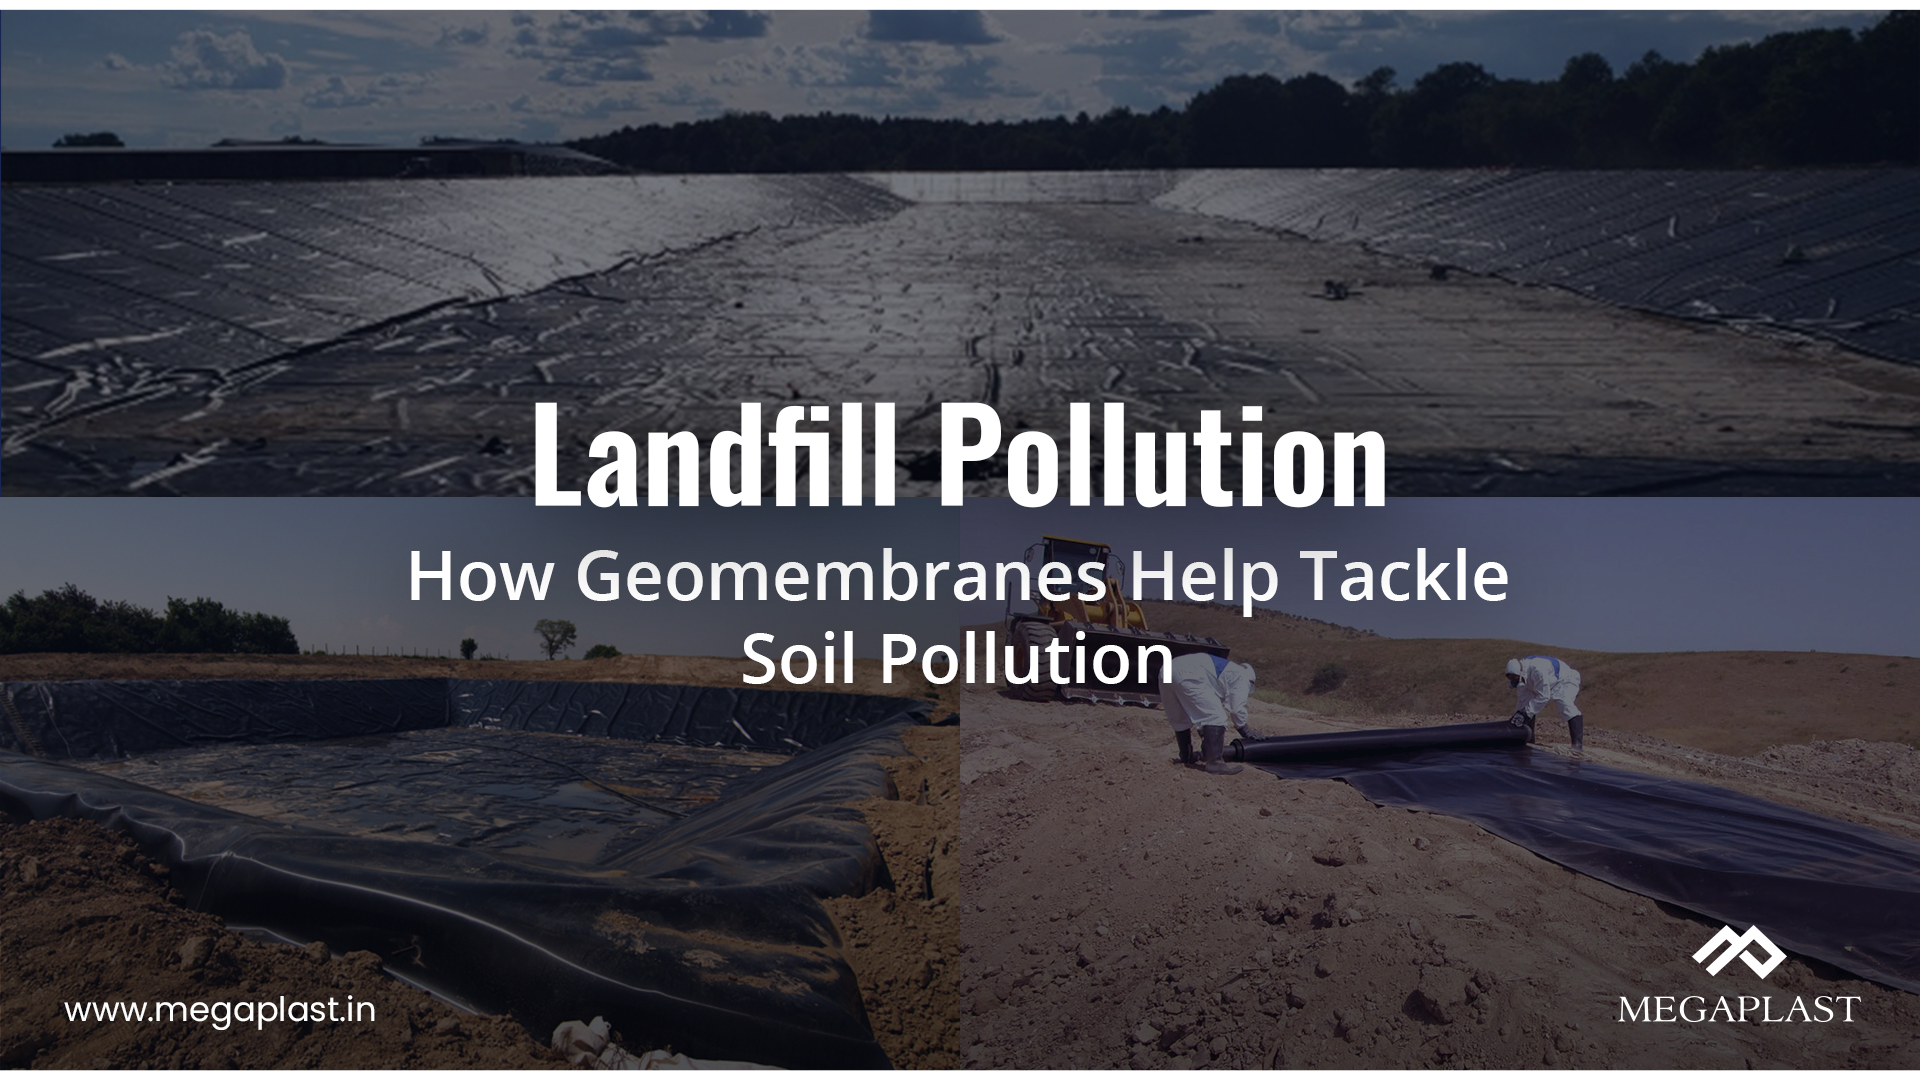 Landfill pollution: How Geomembranes help tackle soil pollution